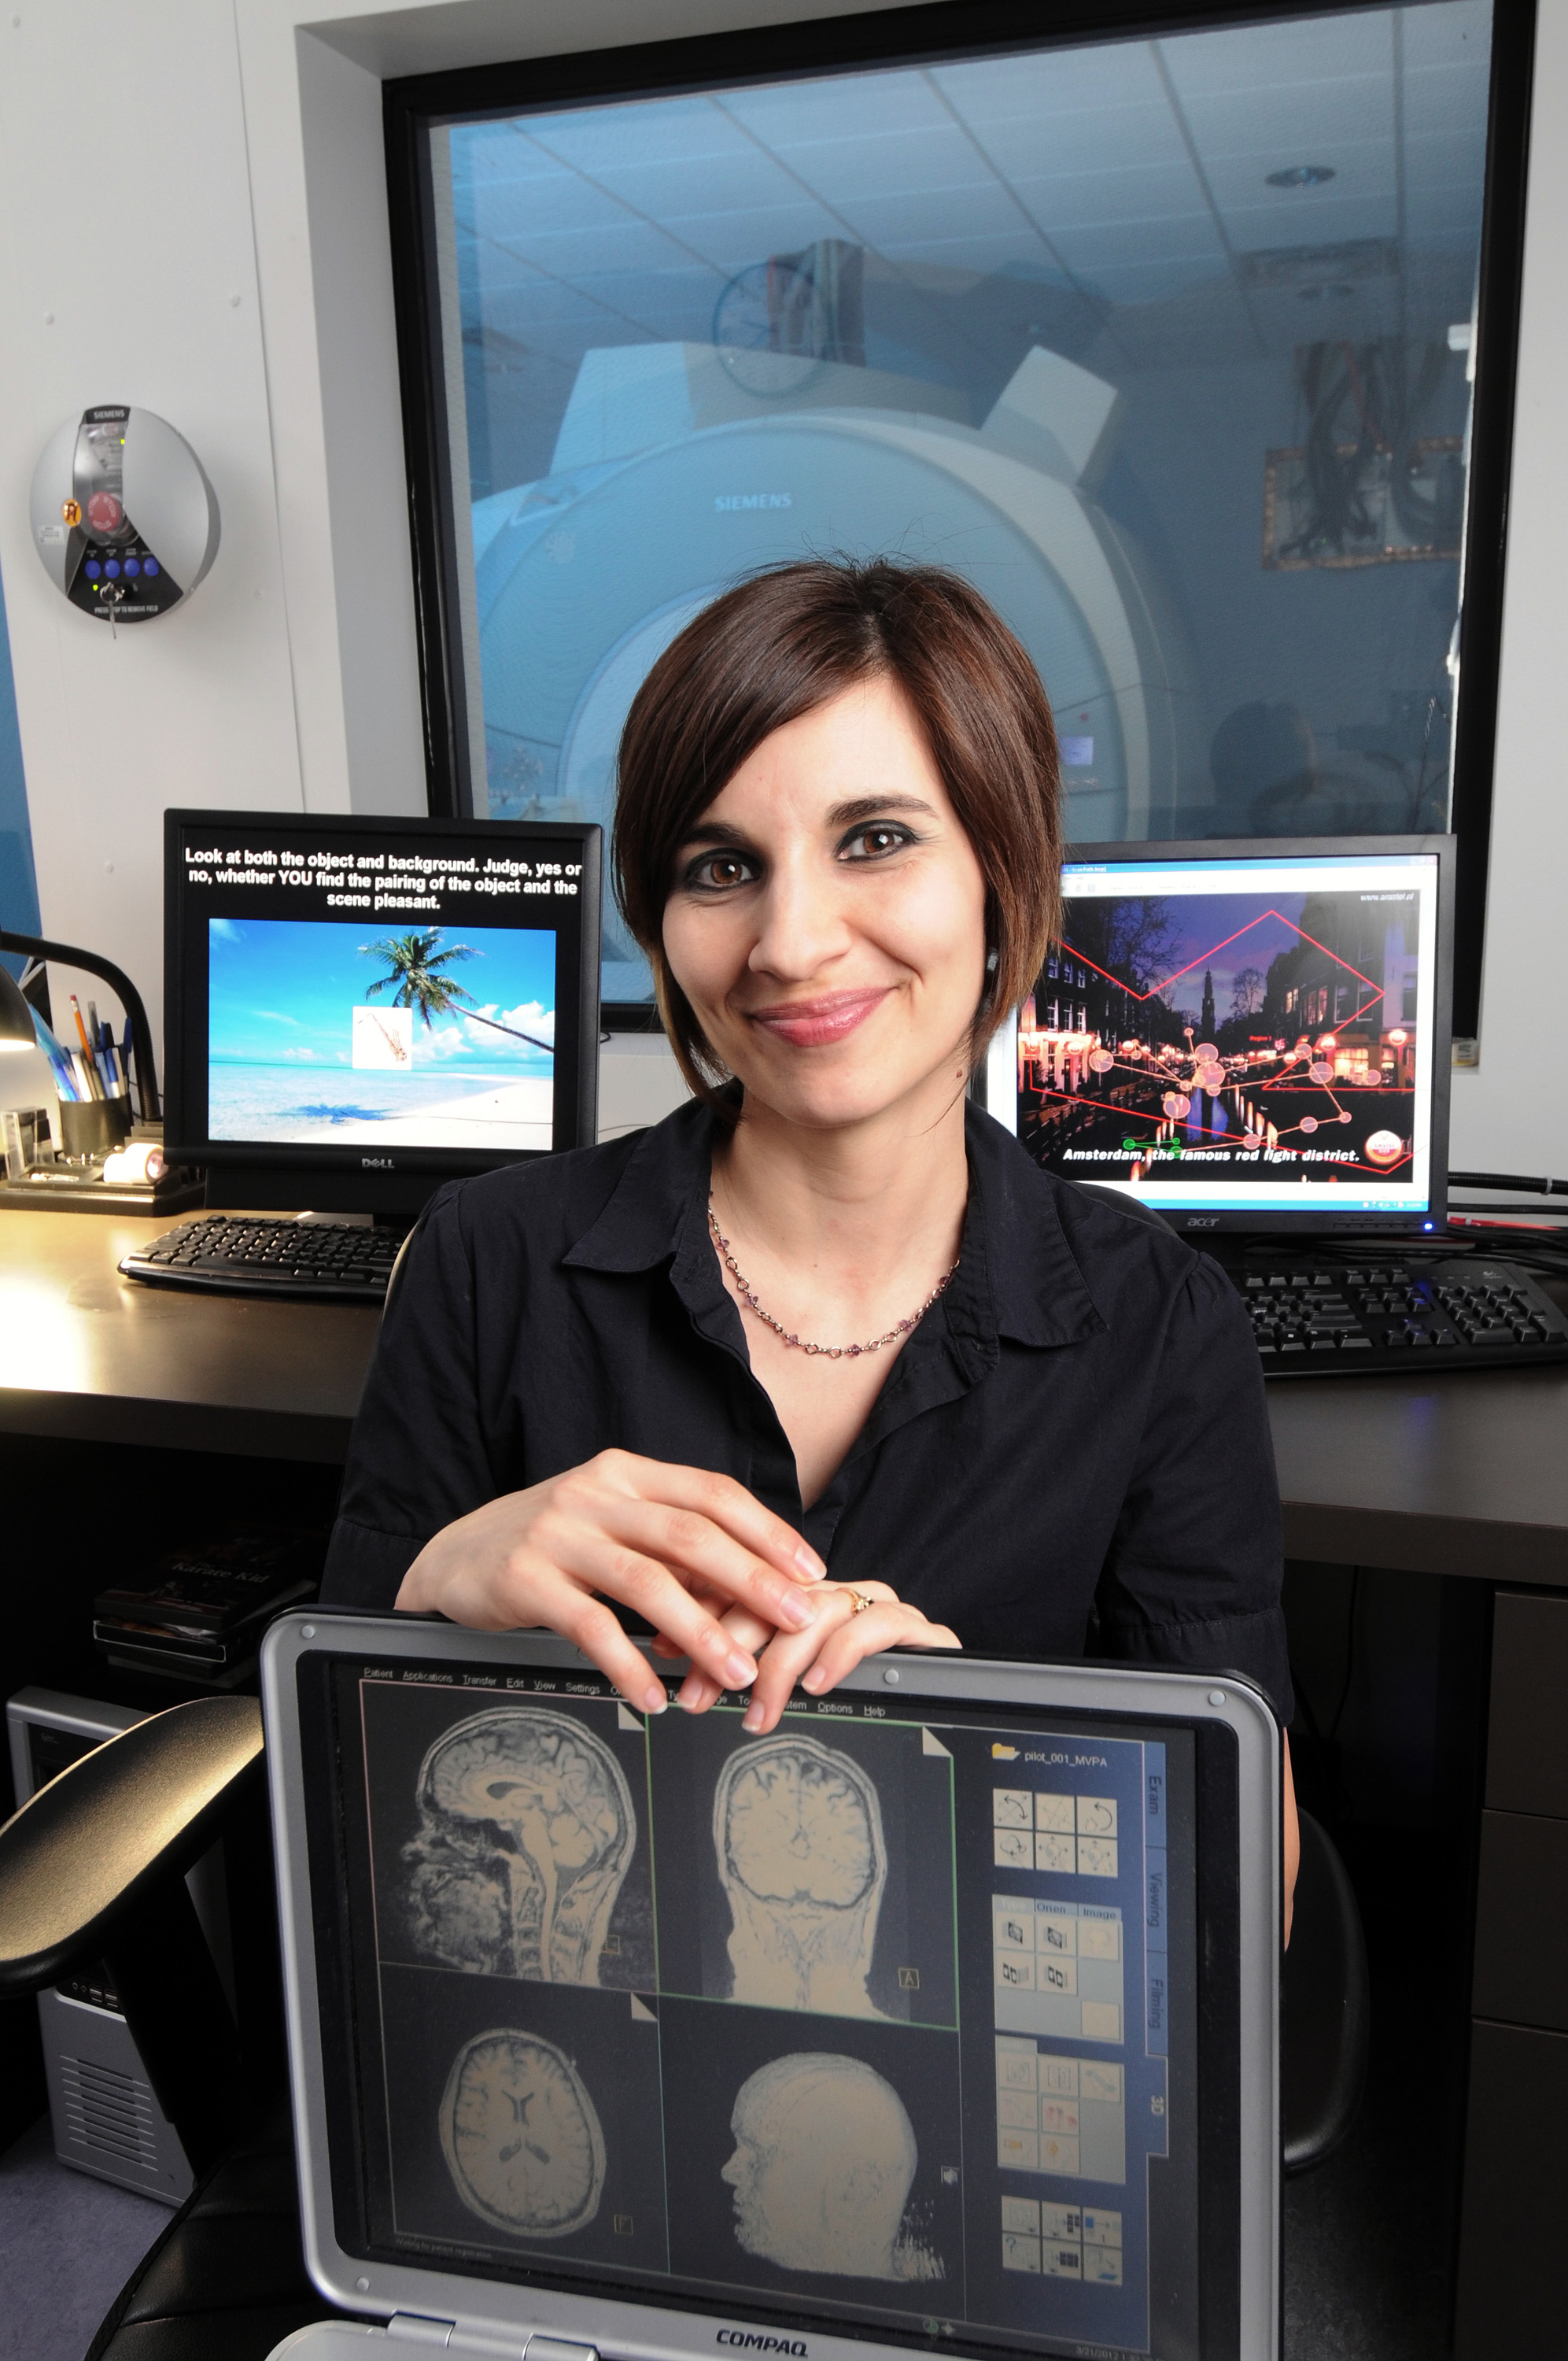 Audrey Duarte, an assistant professor in the School of Psychology, uses the functional MRI scanner at the Georgia State/Georgia Tech Center for Advanced Brain Imaging to measure activity from thousands of neurons in the brain at the same time while subjects try to retrieve episodic memories. (Georgia Tech Photo: Gary Meek)